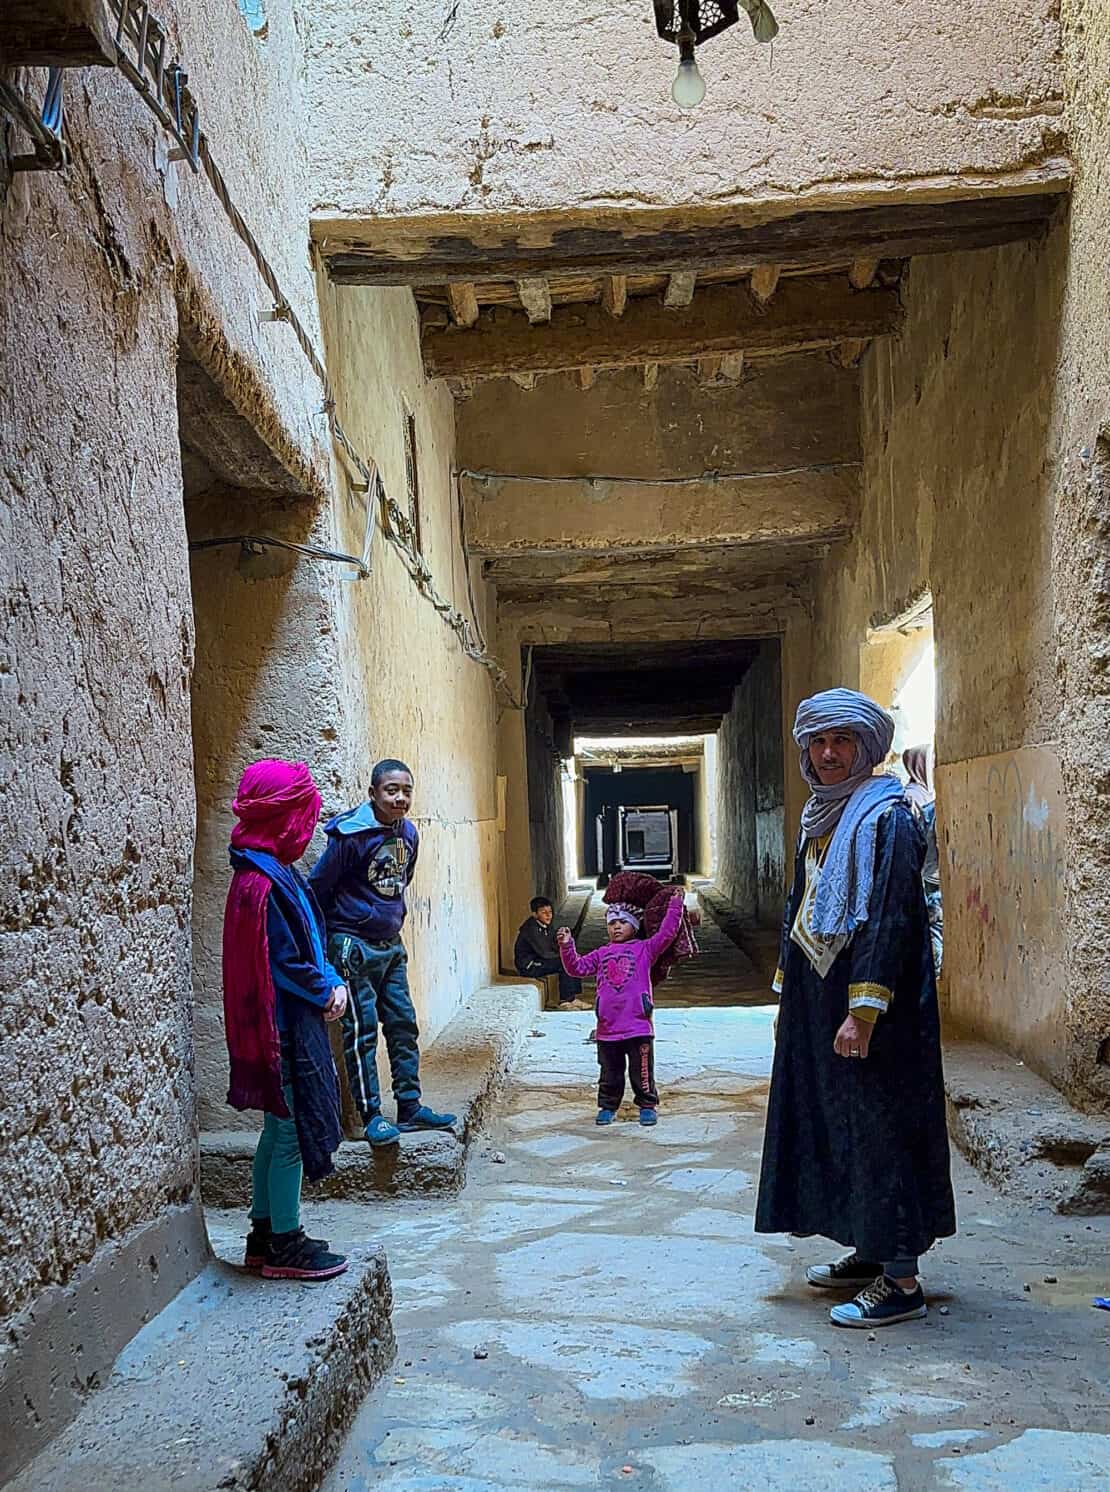 Playing with kids in Ksar el Khorbat near Tinejdad as part of a Morocco Itinerary